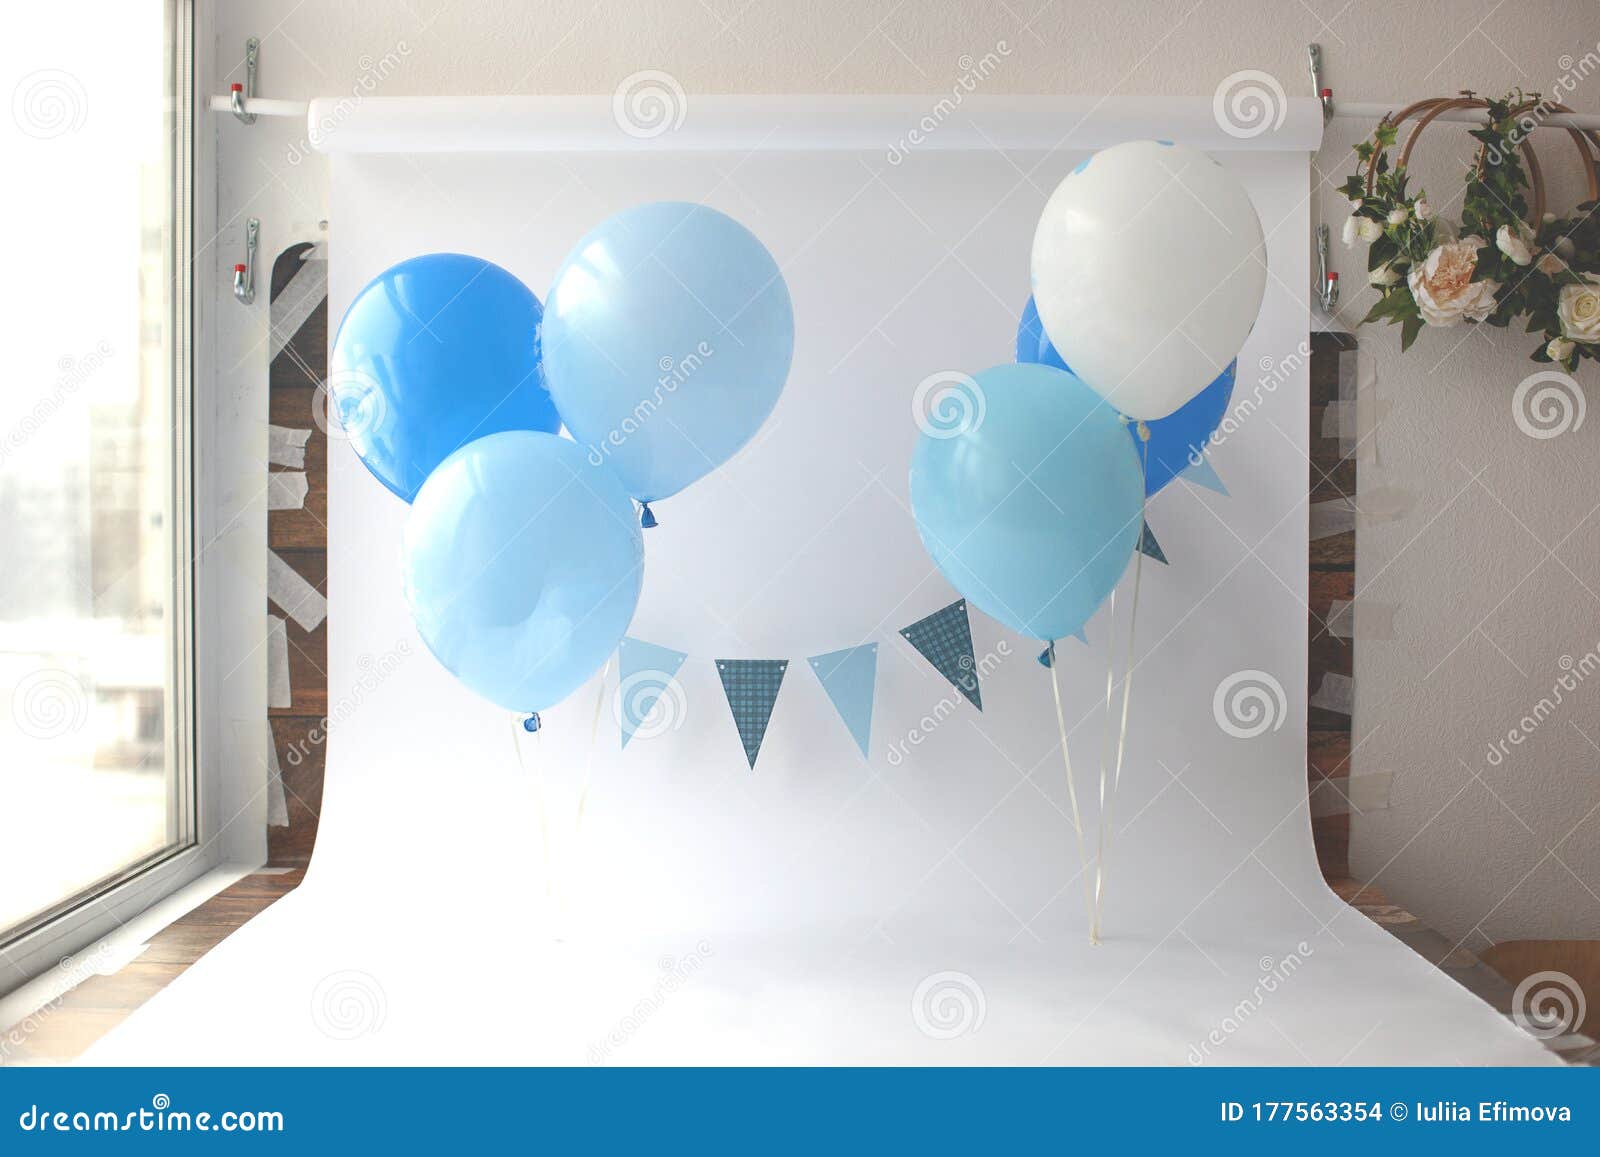 DaShan 12x8ft Happy Birthday Backdrop Colorful Balloons and Confetti Photography Background Kid Adult Baby Boy Girl Newborn Birthday Party Decor Wallpaper Artistic Portrait Photo Studio Props 